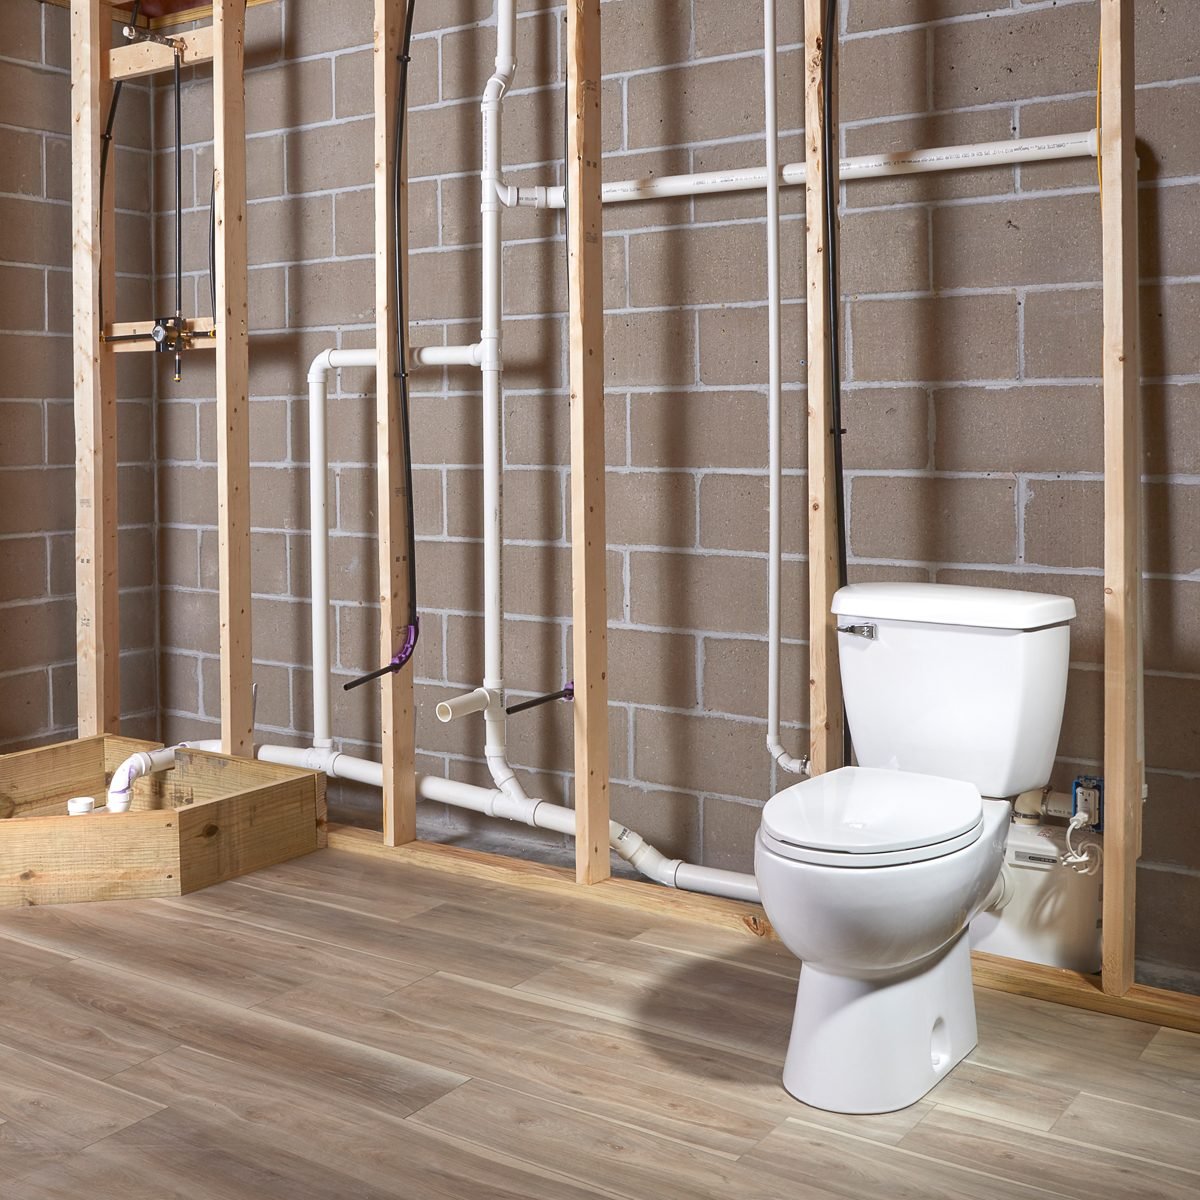 How to Easily Find a Suitable Toilet for Your Bathroom - BUILD Magazine